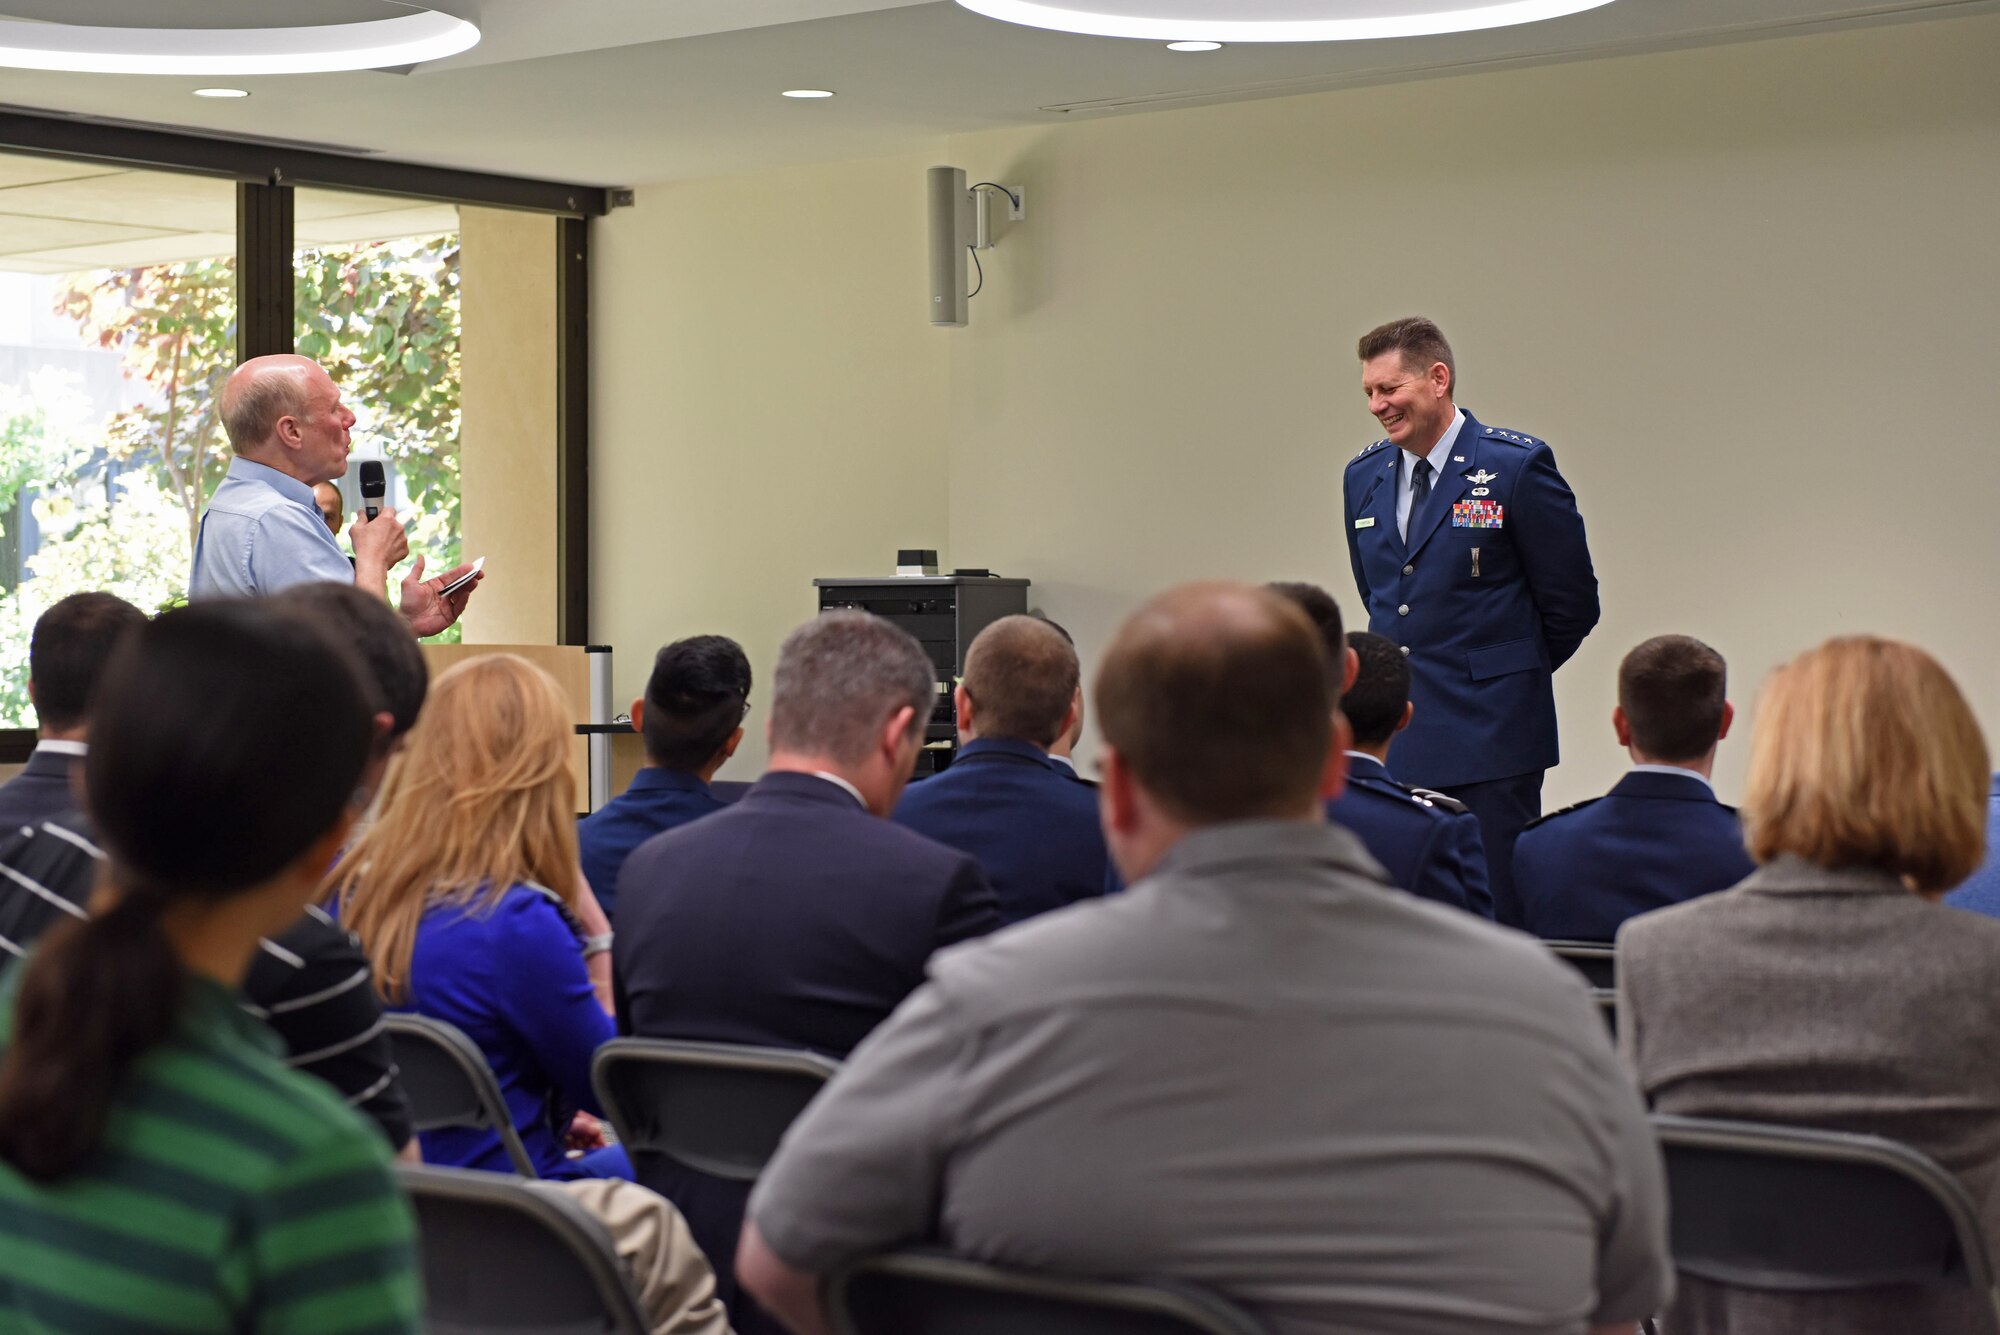 Lt. Gen. David Thompson, Air Force Space Command vice commander, laughs at a joke told by a University of Pittsburgh professor during a Q&A session in Pittsburgh, Pennsylvania June 14, 2019.